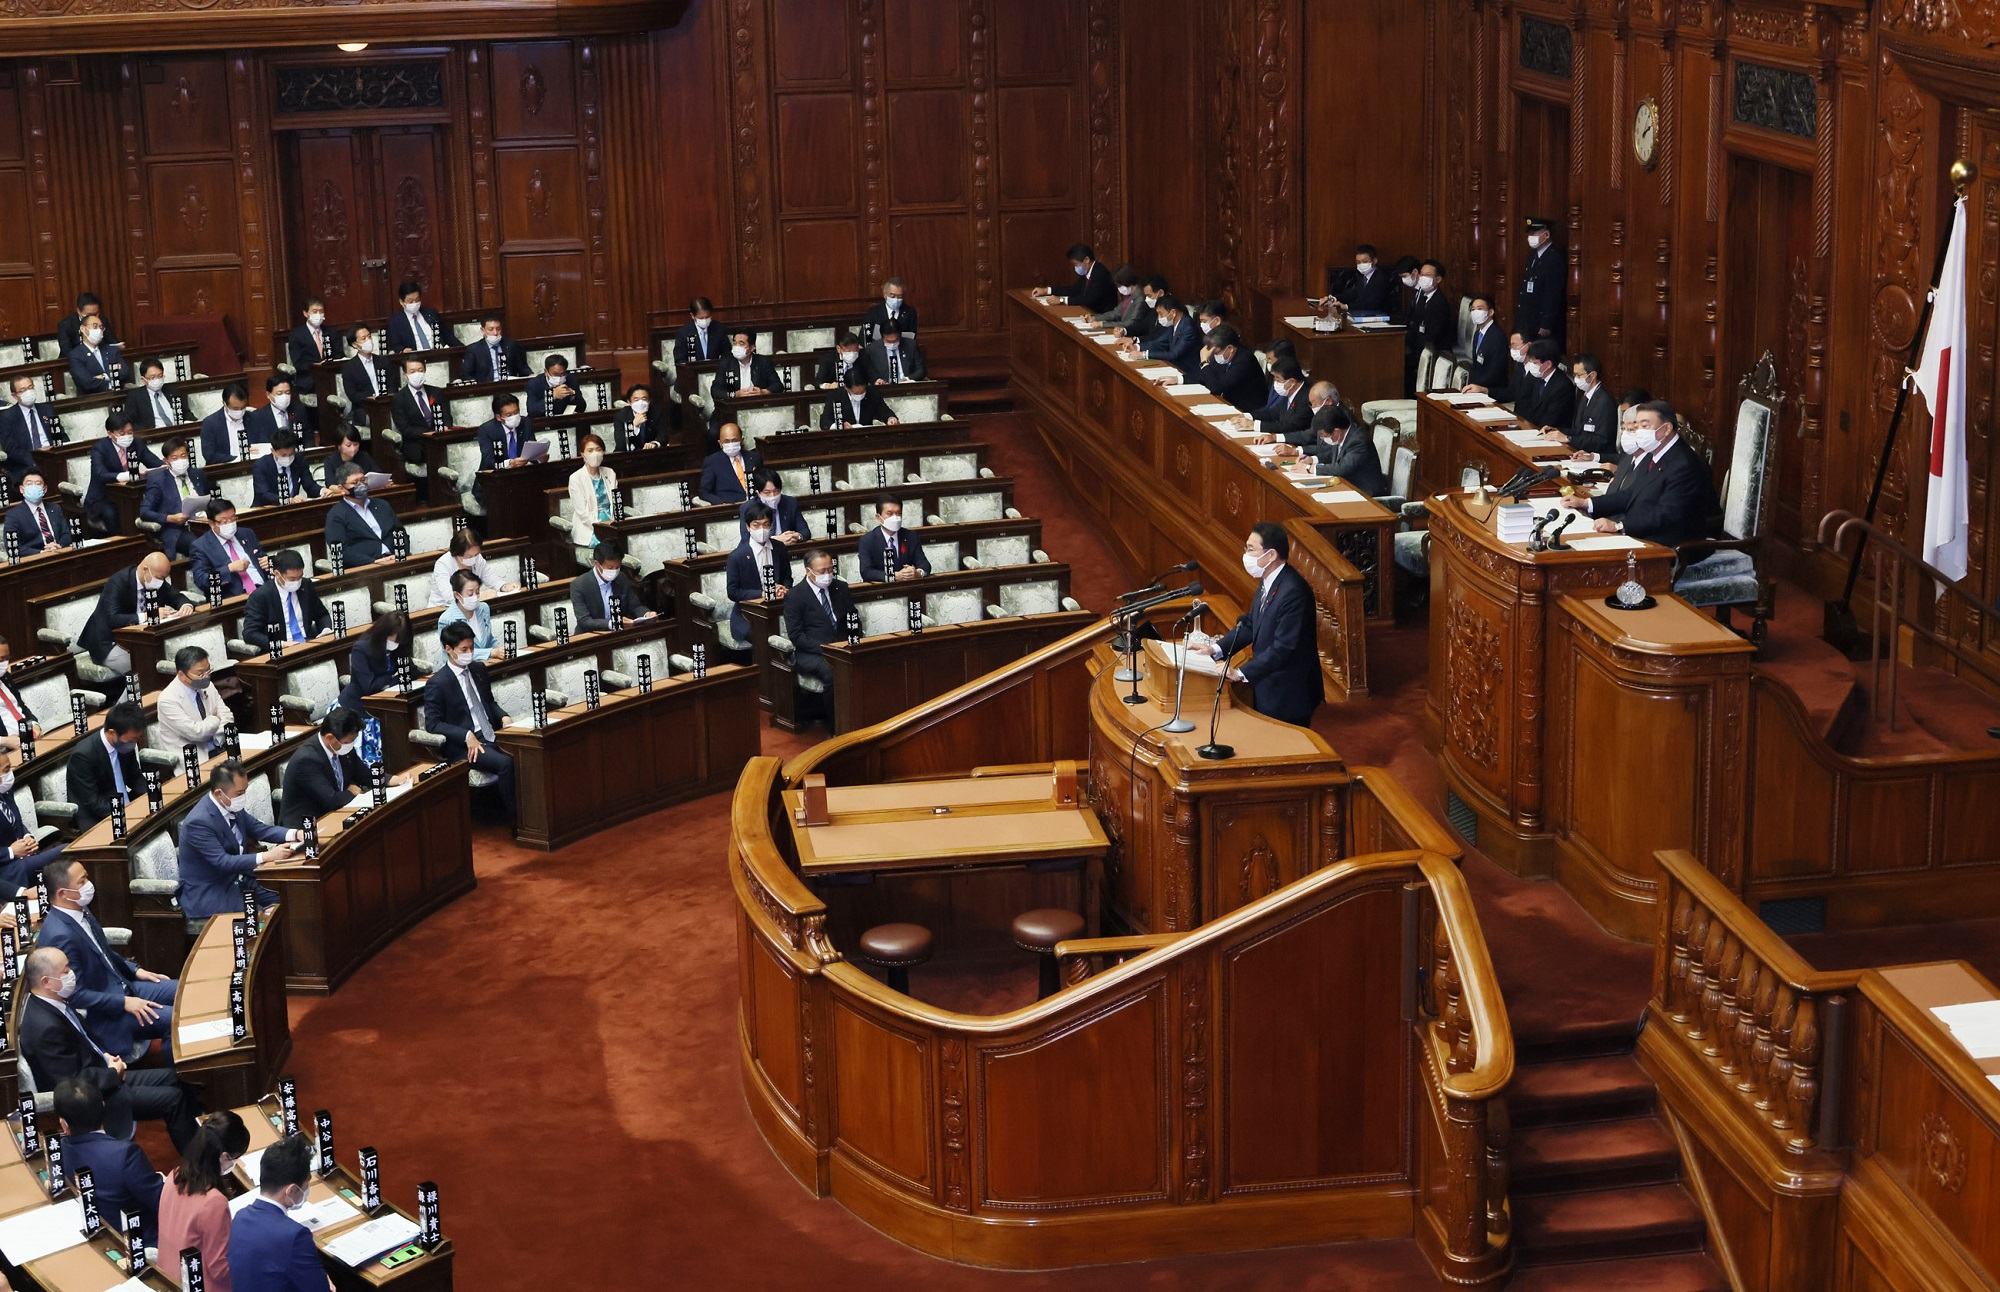 Photograph of the Prime Minister delivering a policy speech during a plenary session of the House of Representatives (4)